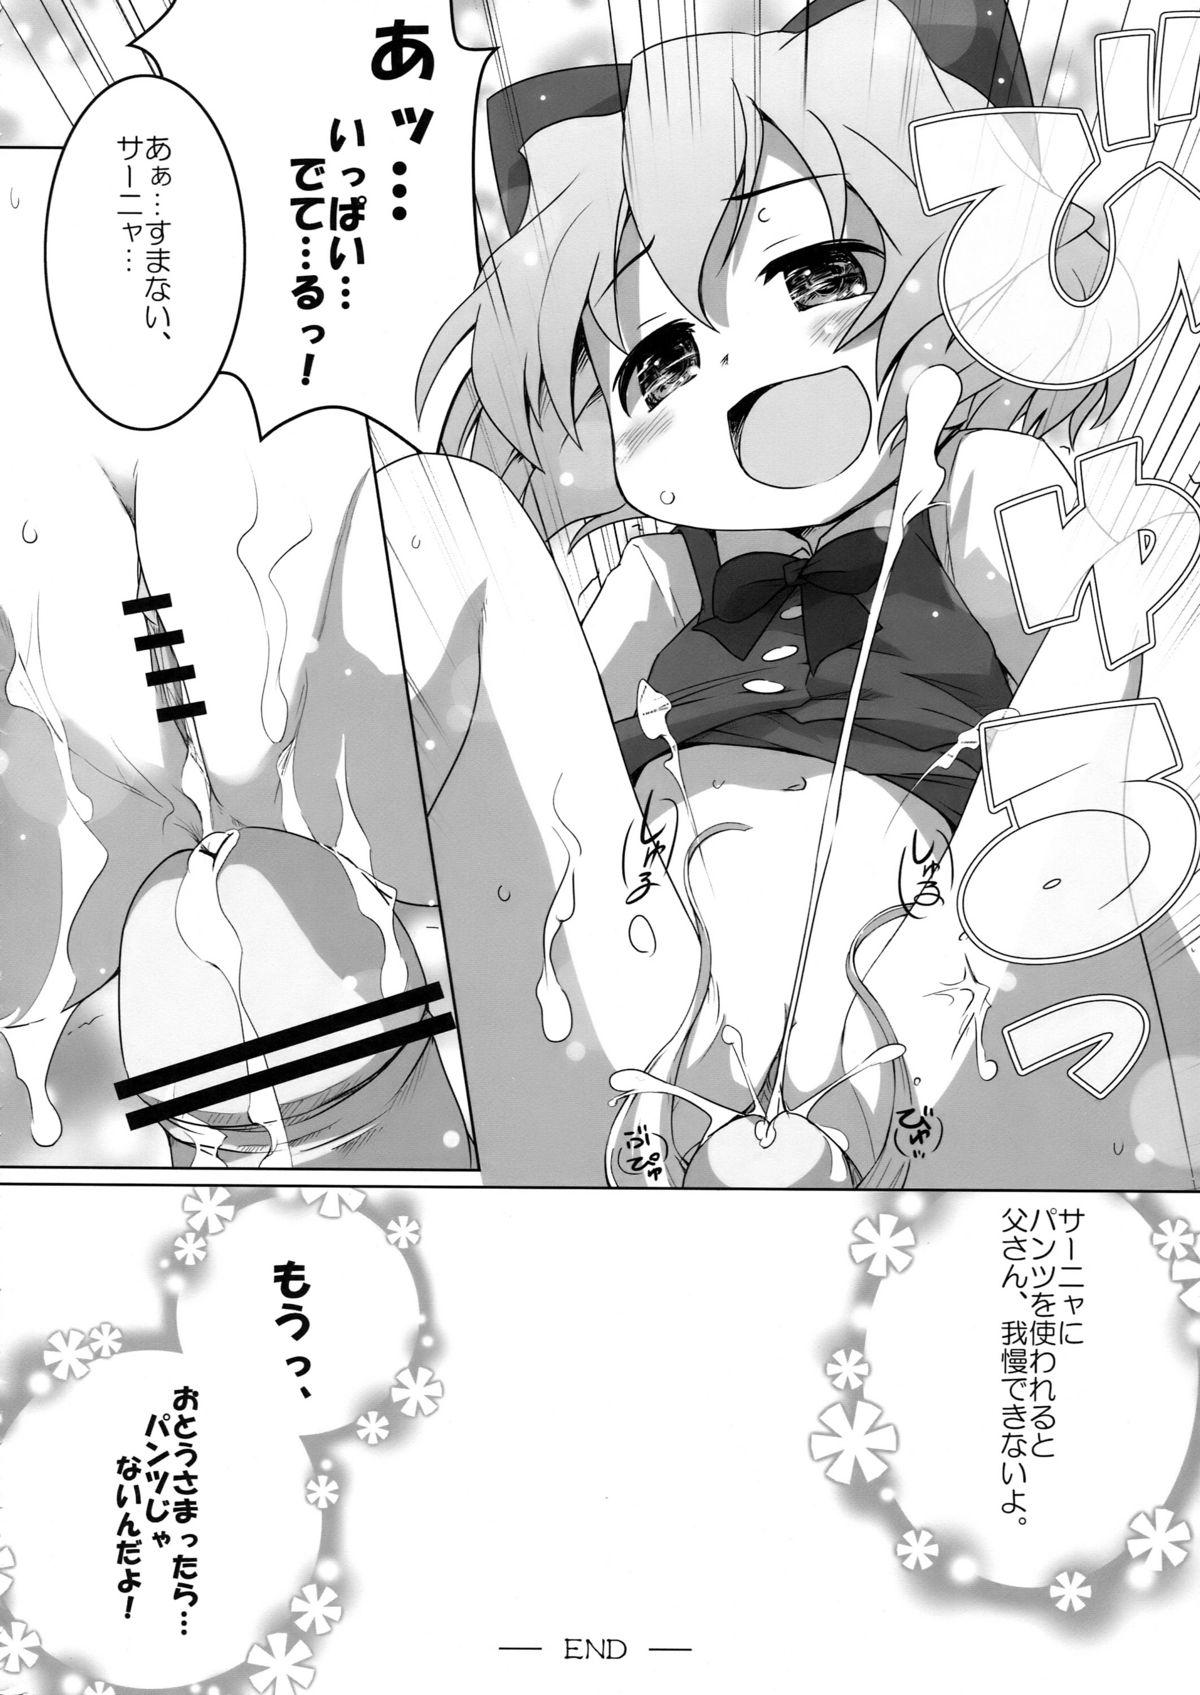 Roughsex THE Pants ja nai mon! - Strike witches Fat - Page 8